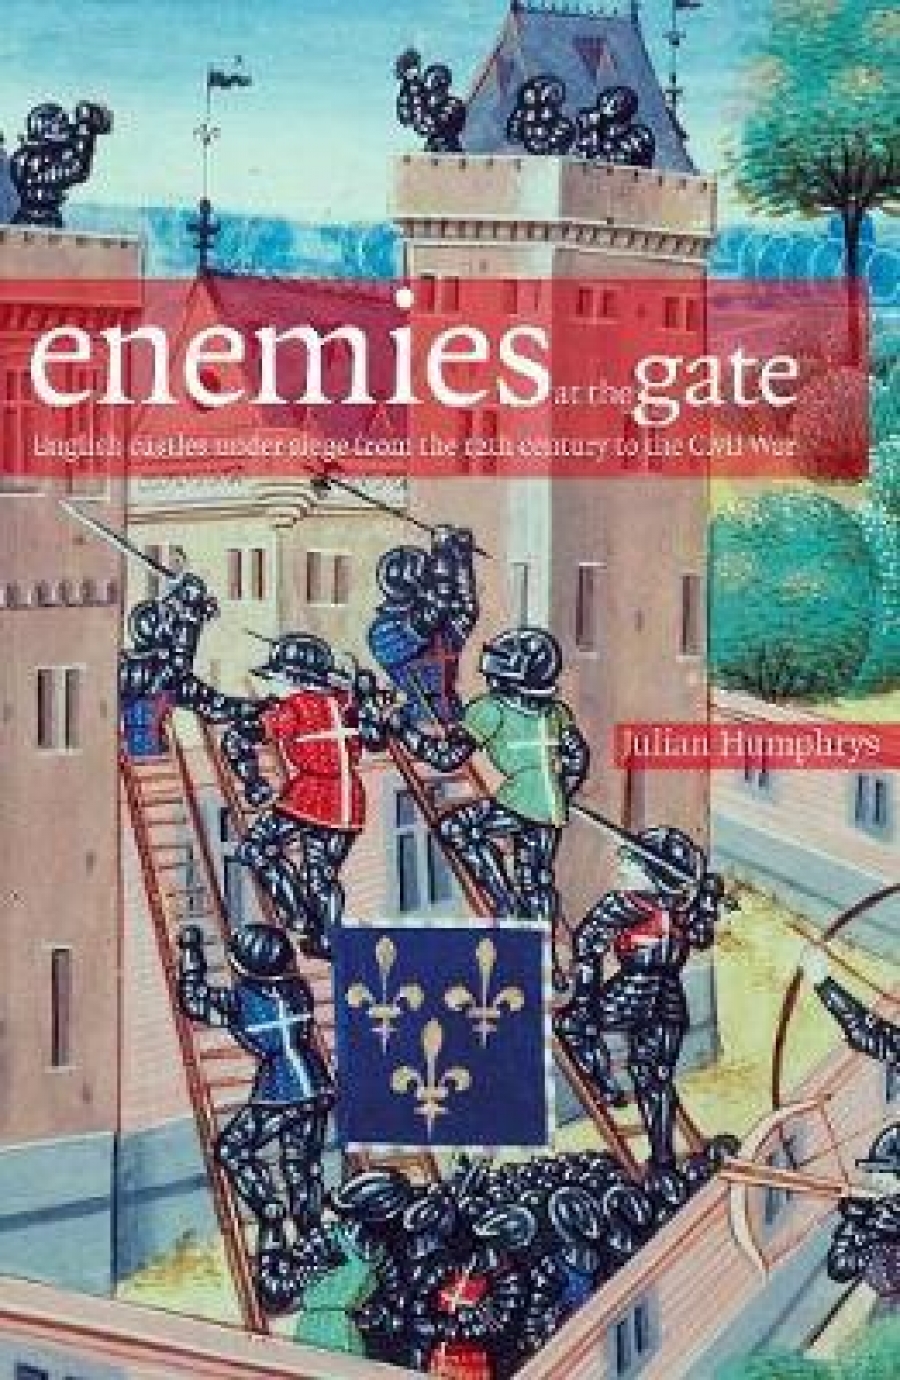 Humphrys, Julian Enemies at the Gates: English Castles Under Siege From the 12th Century to the Civil War 